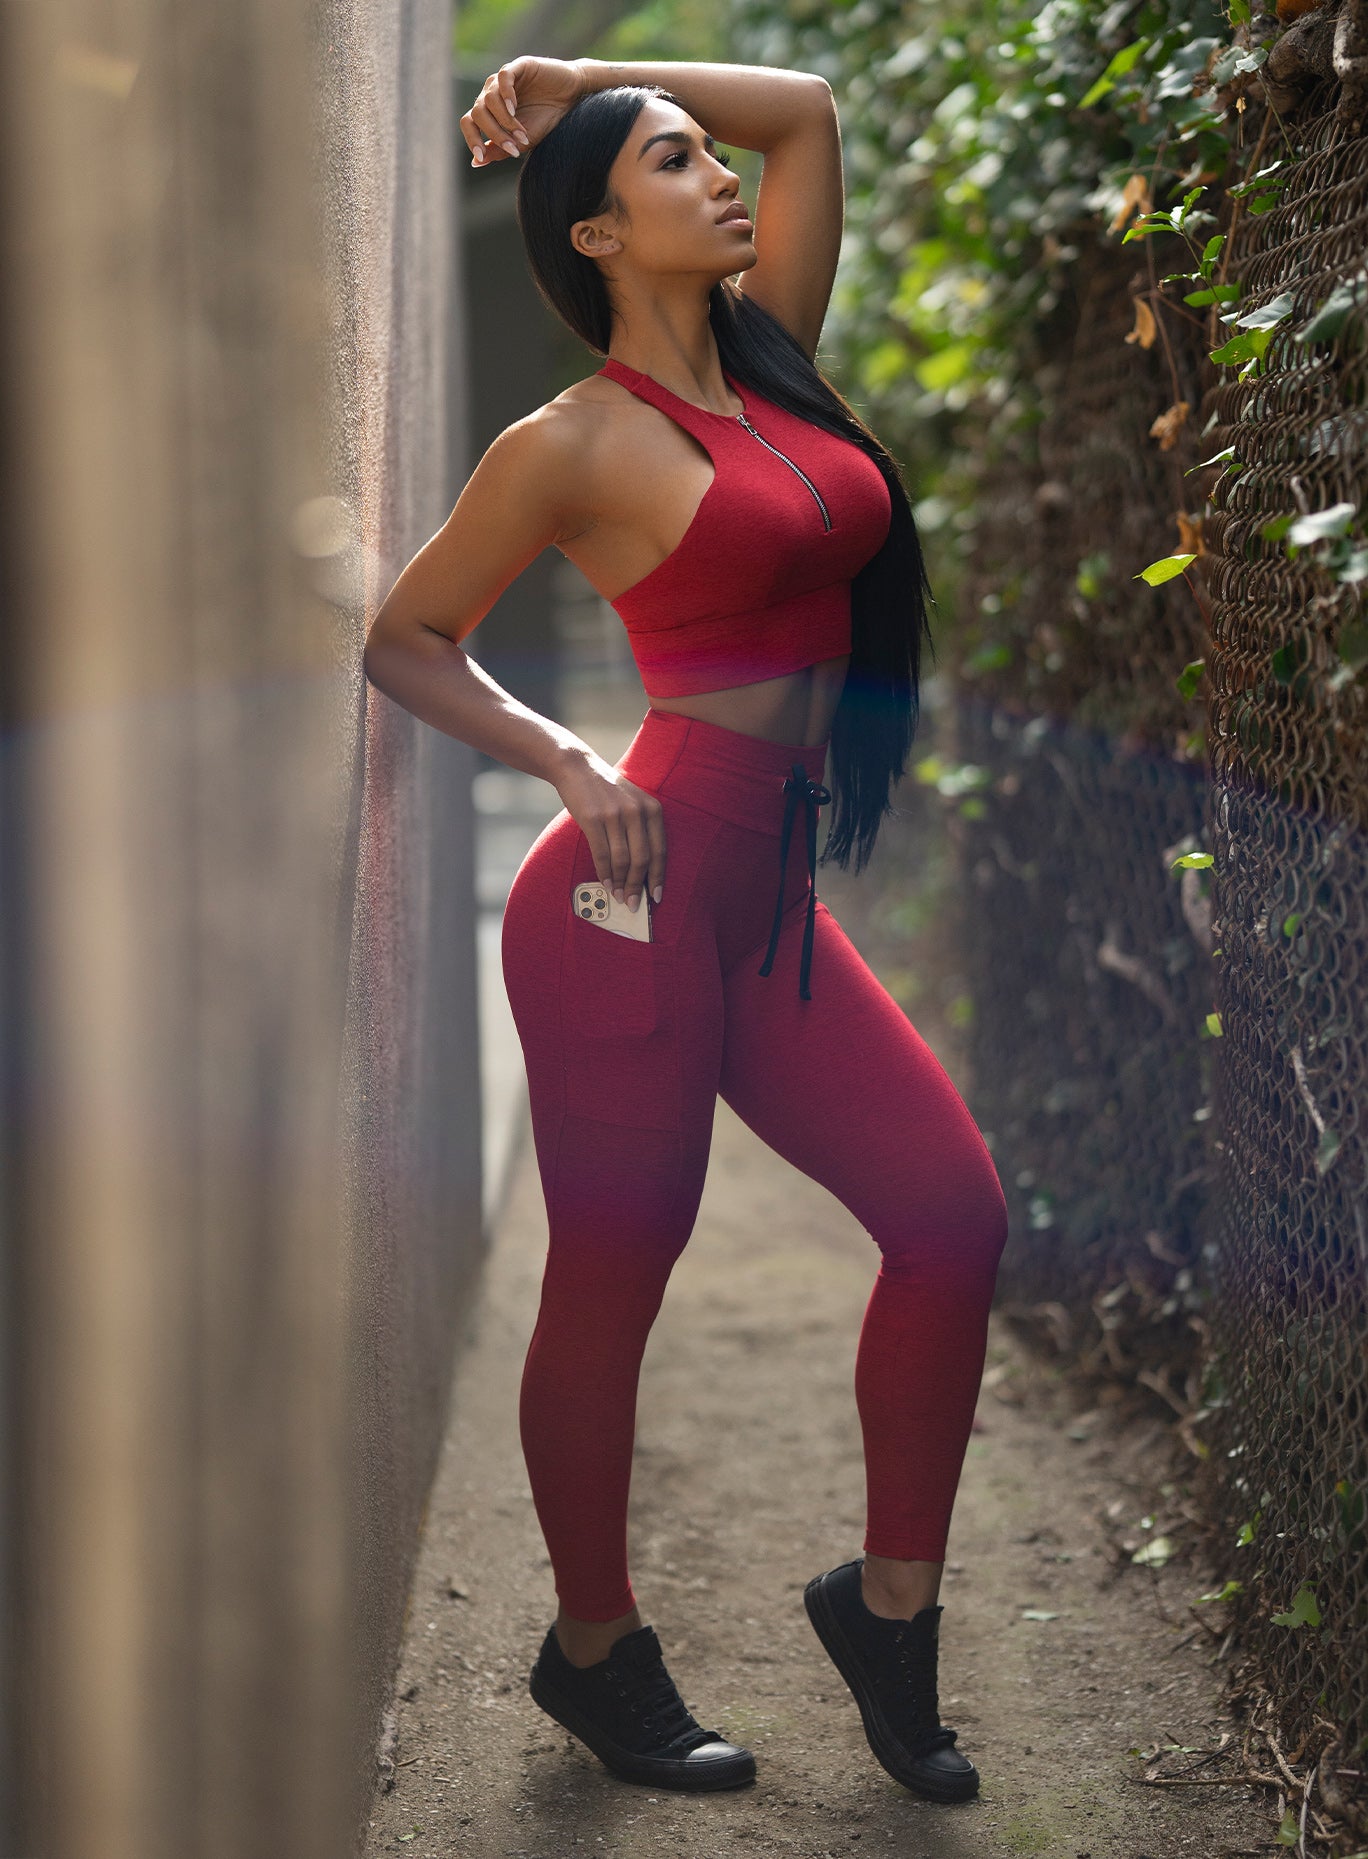 Right side view of the model in our thrive leggings in sunset red color and a matching bra